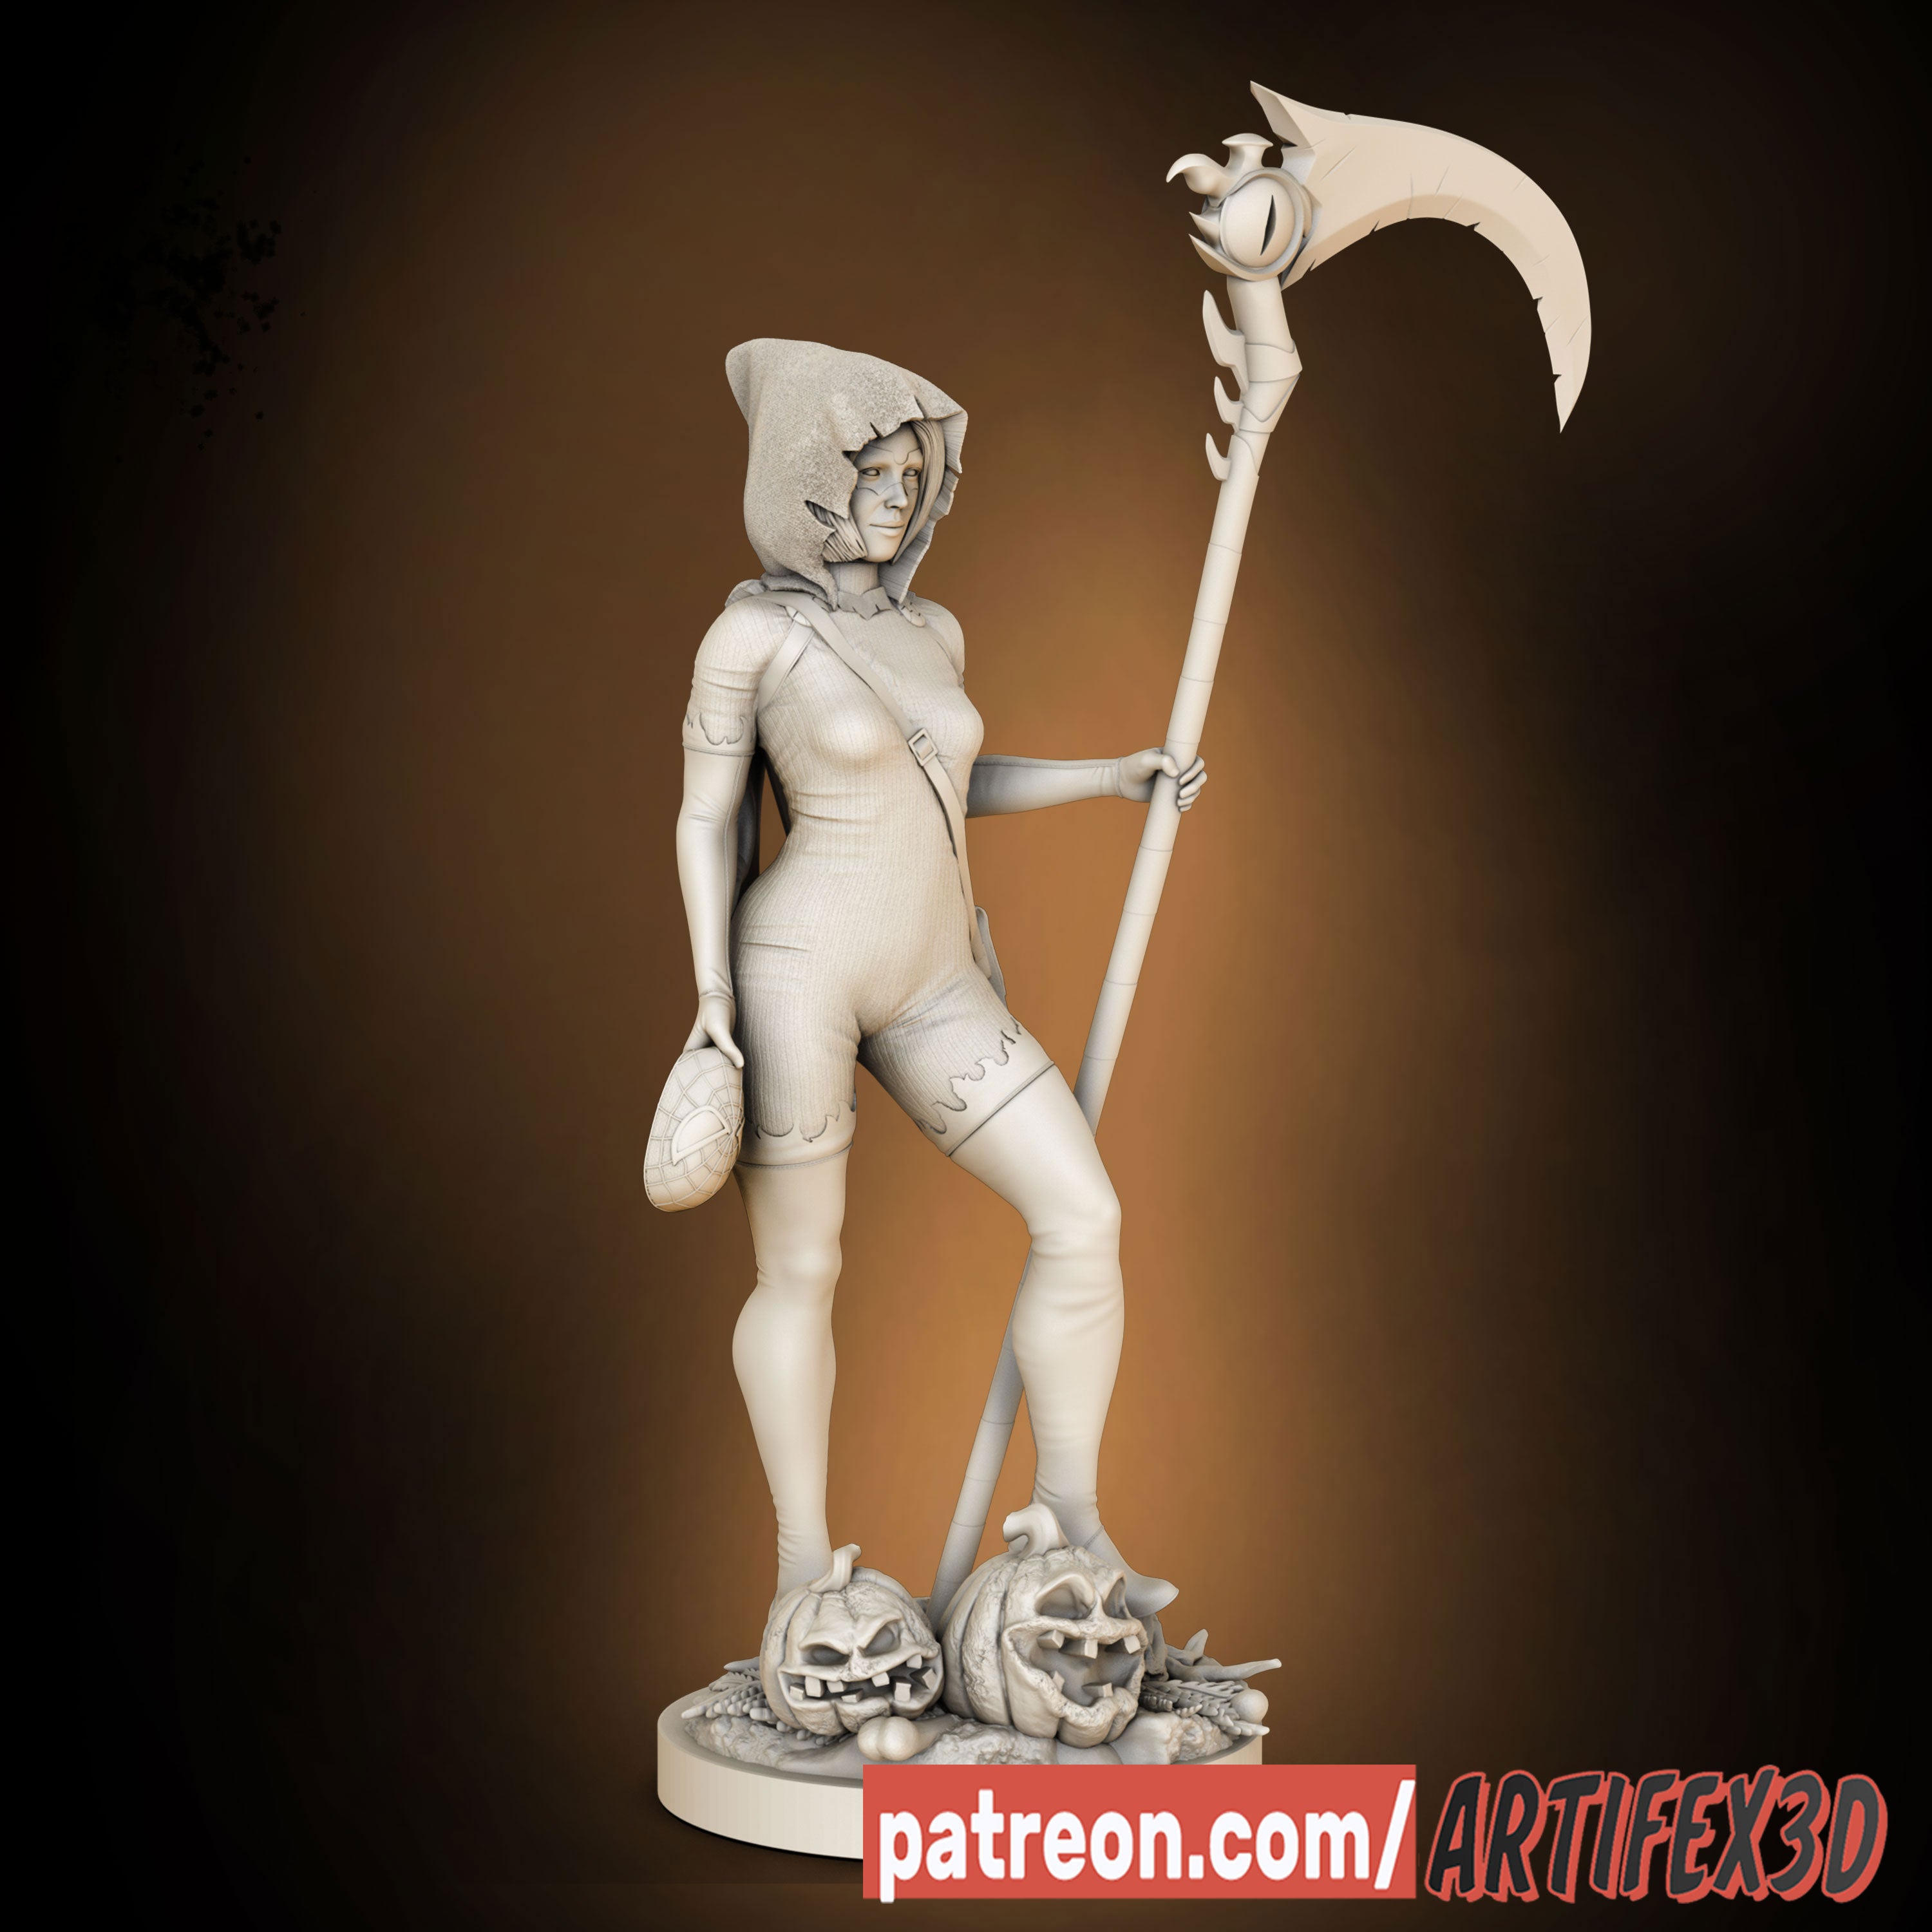 Hallow's Eve (Marvel) - 3D Print - Fan Art - 75mm and 180mm SFW/NSFW